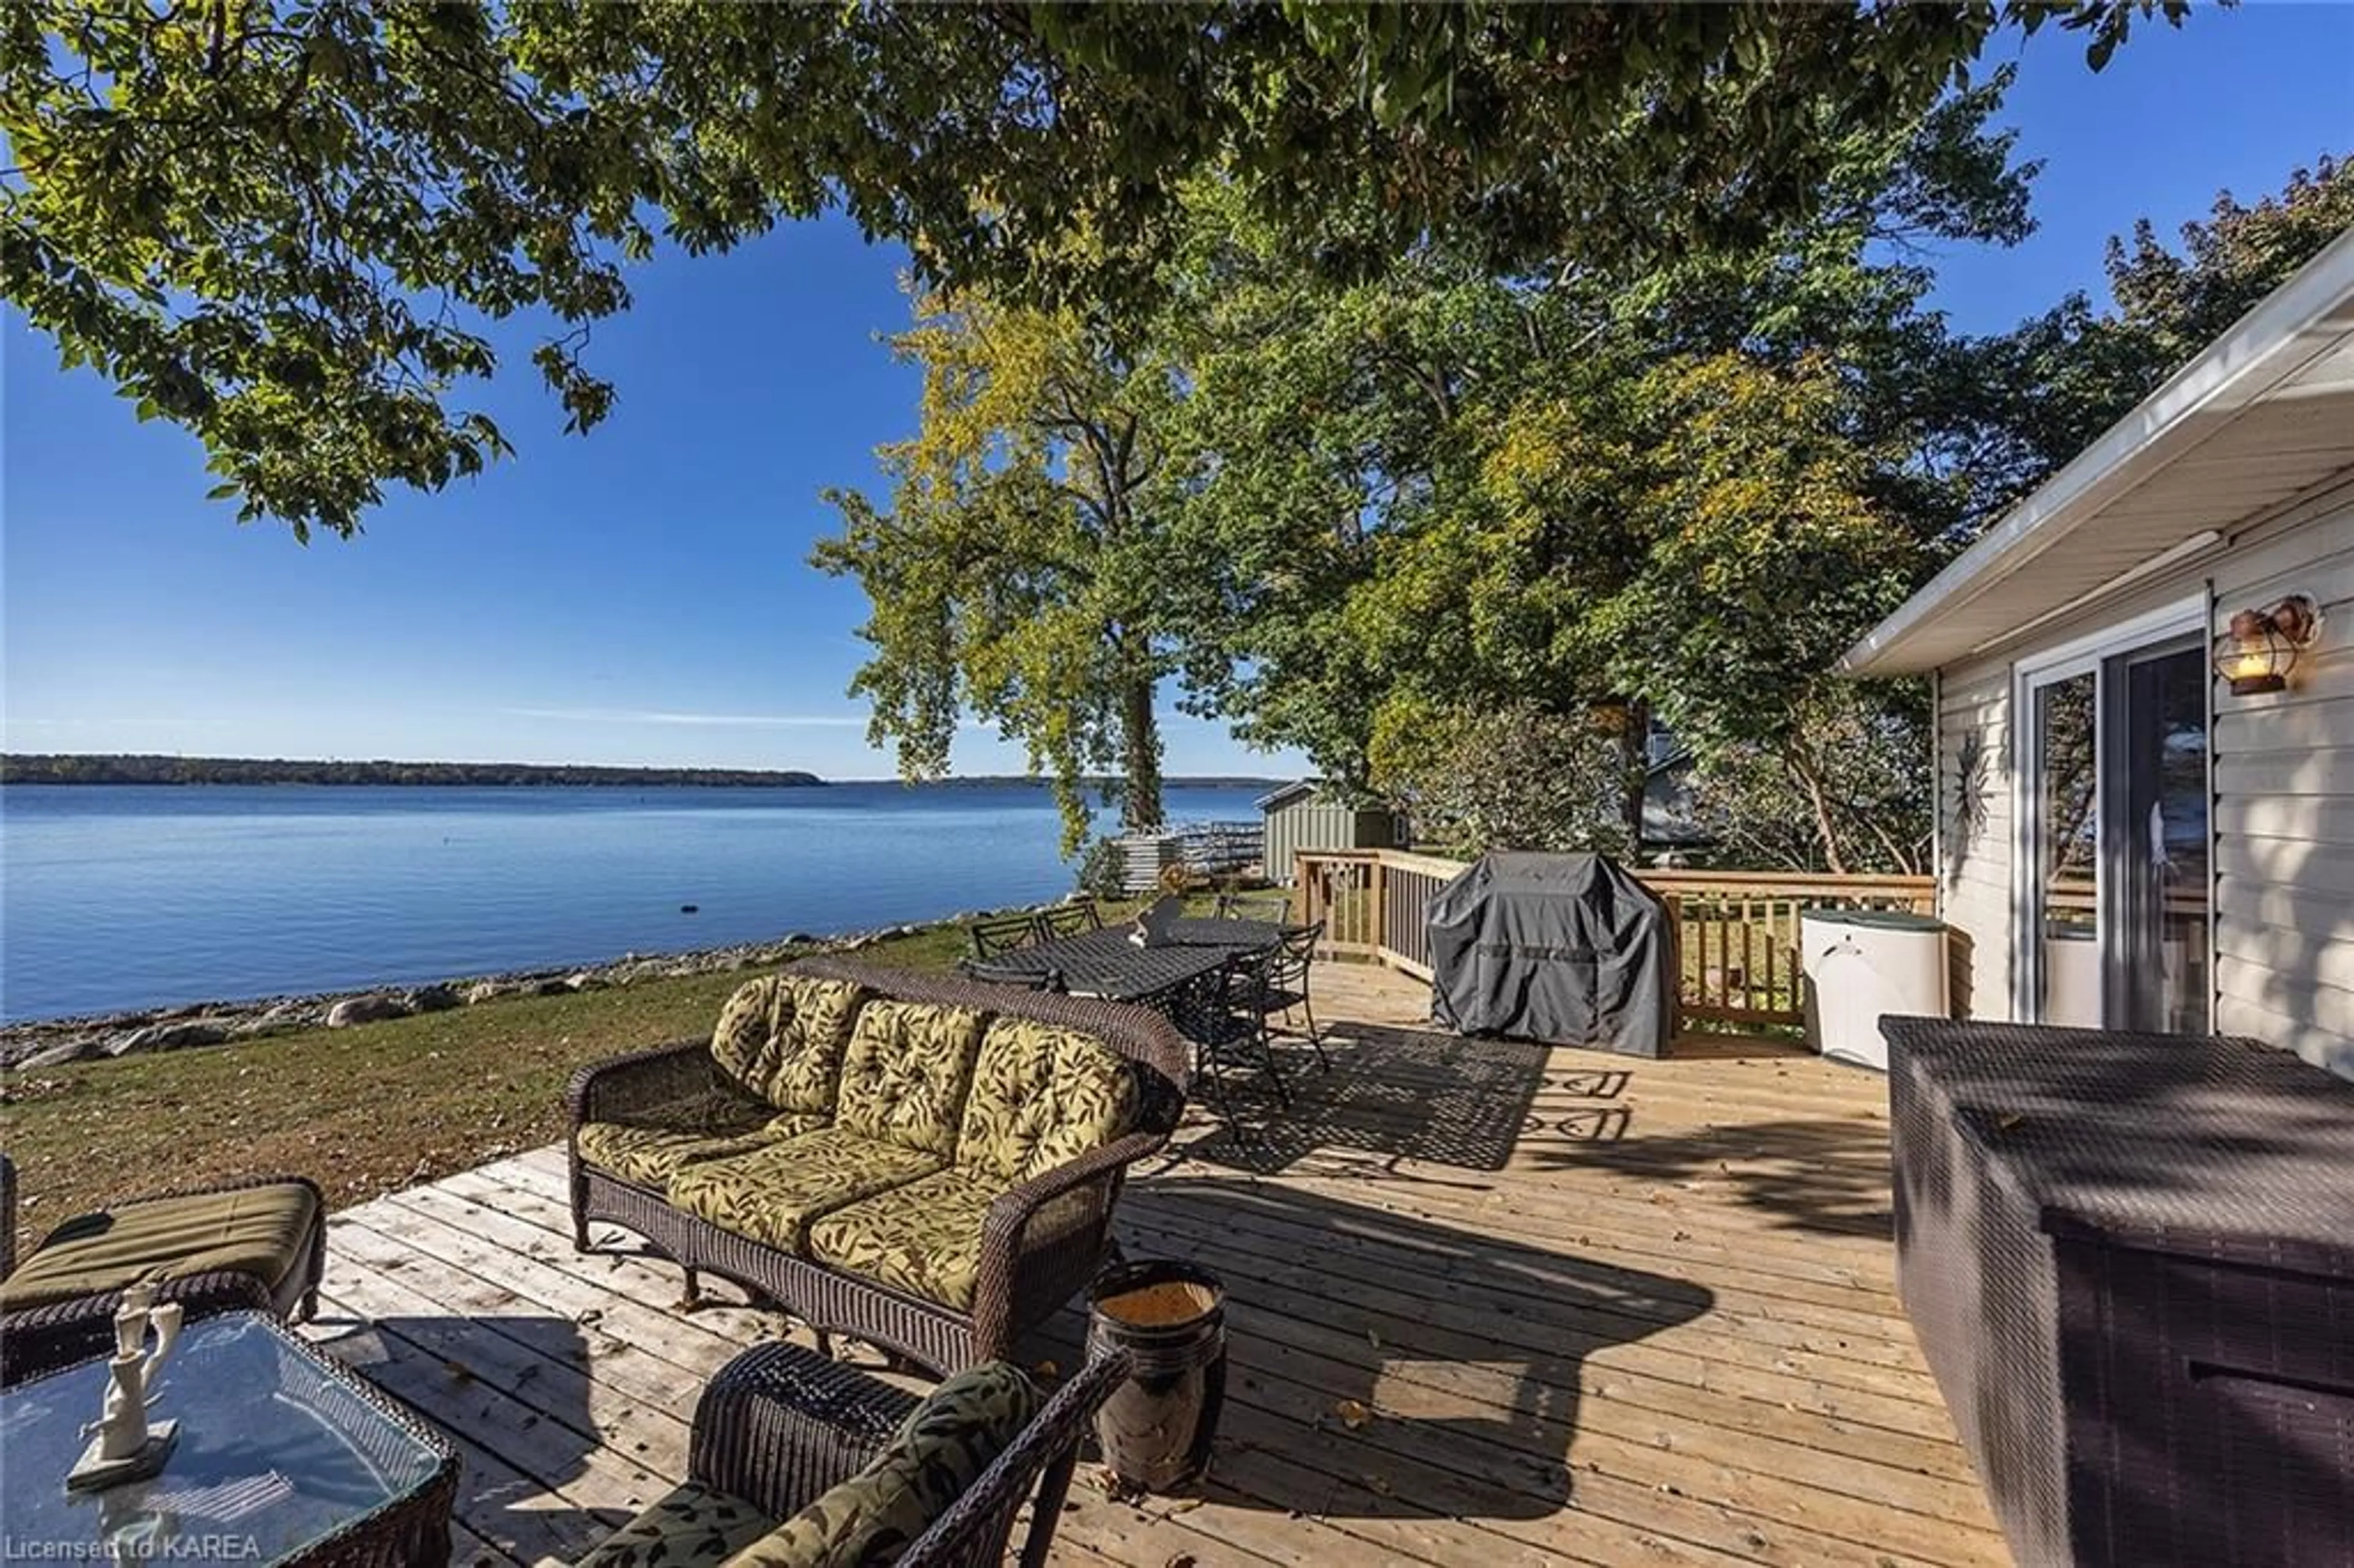 Lakeview for 146 Ungar Island Rd, Greater Napanee Ontario K7R 3L1